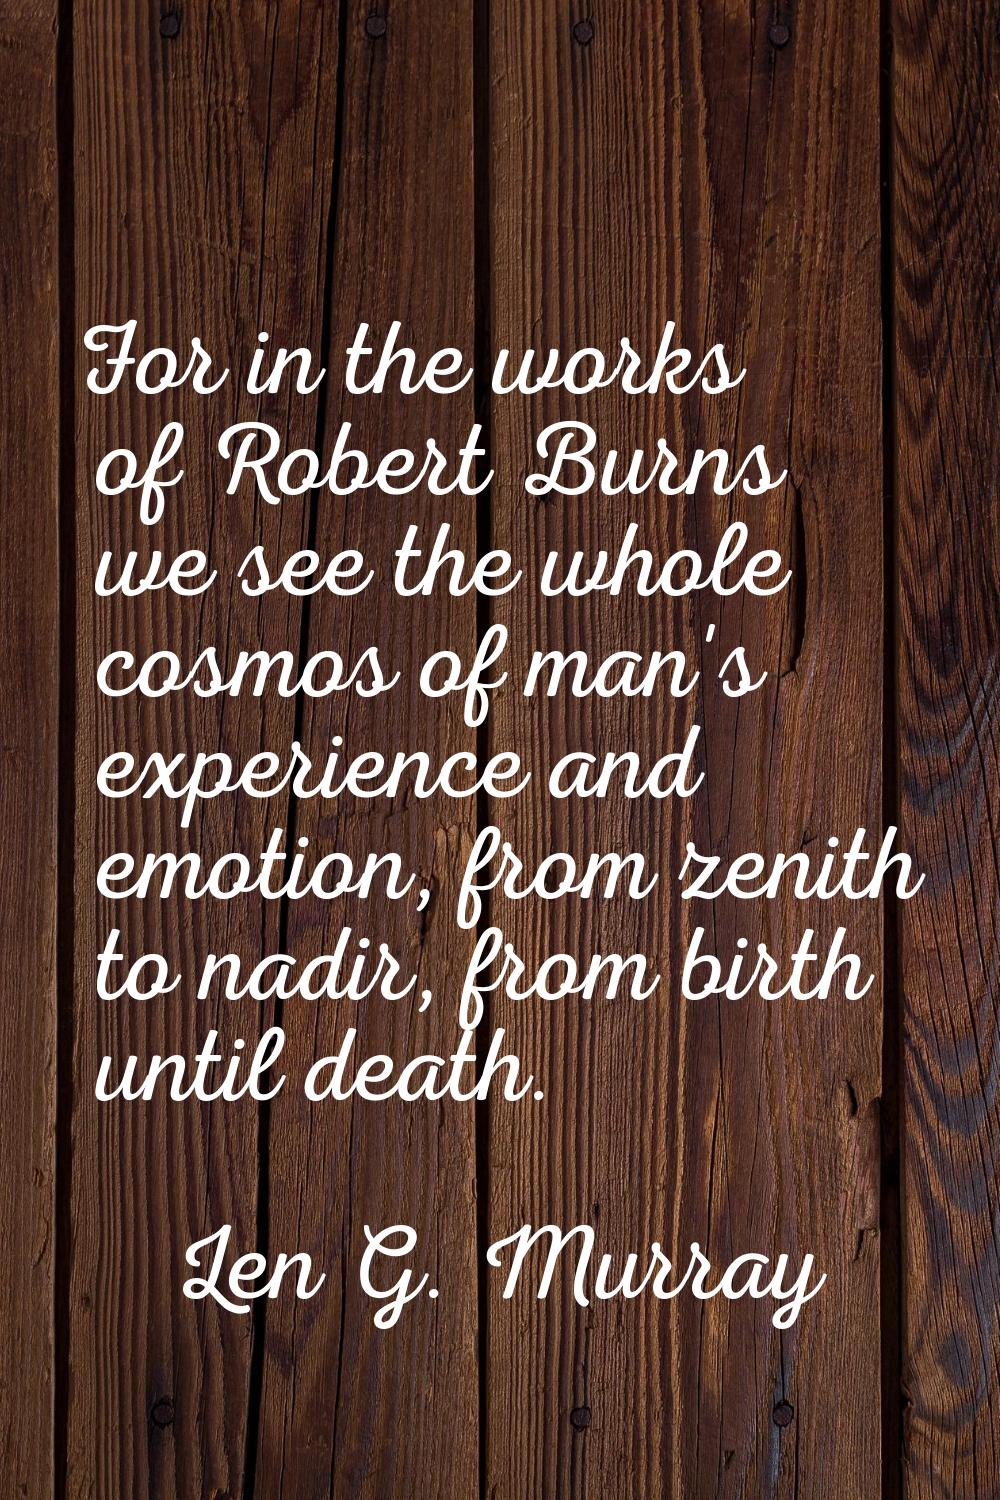 For in the works of Robert Burns we see the whole cosmos of man's experience and emotion, from zeni